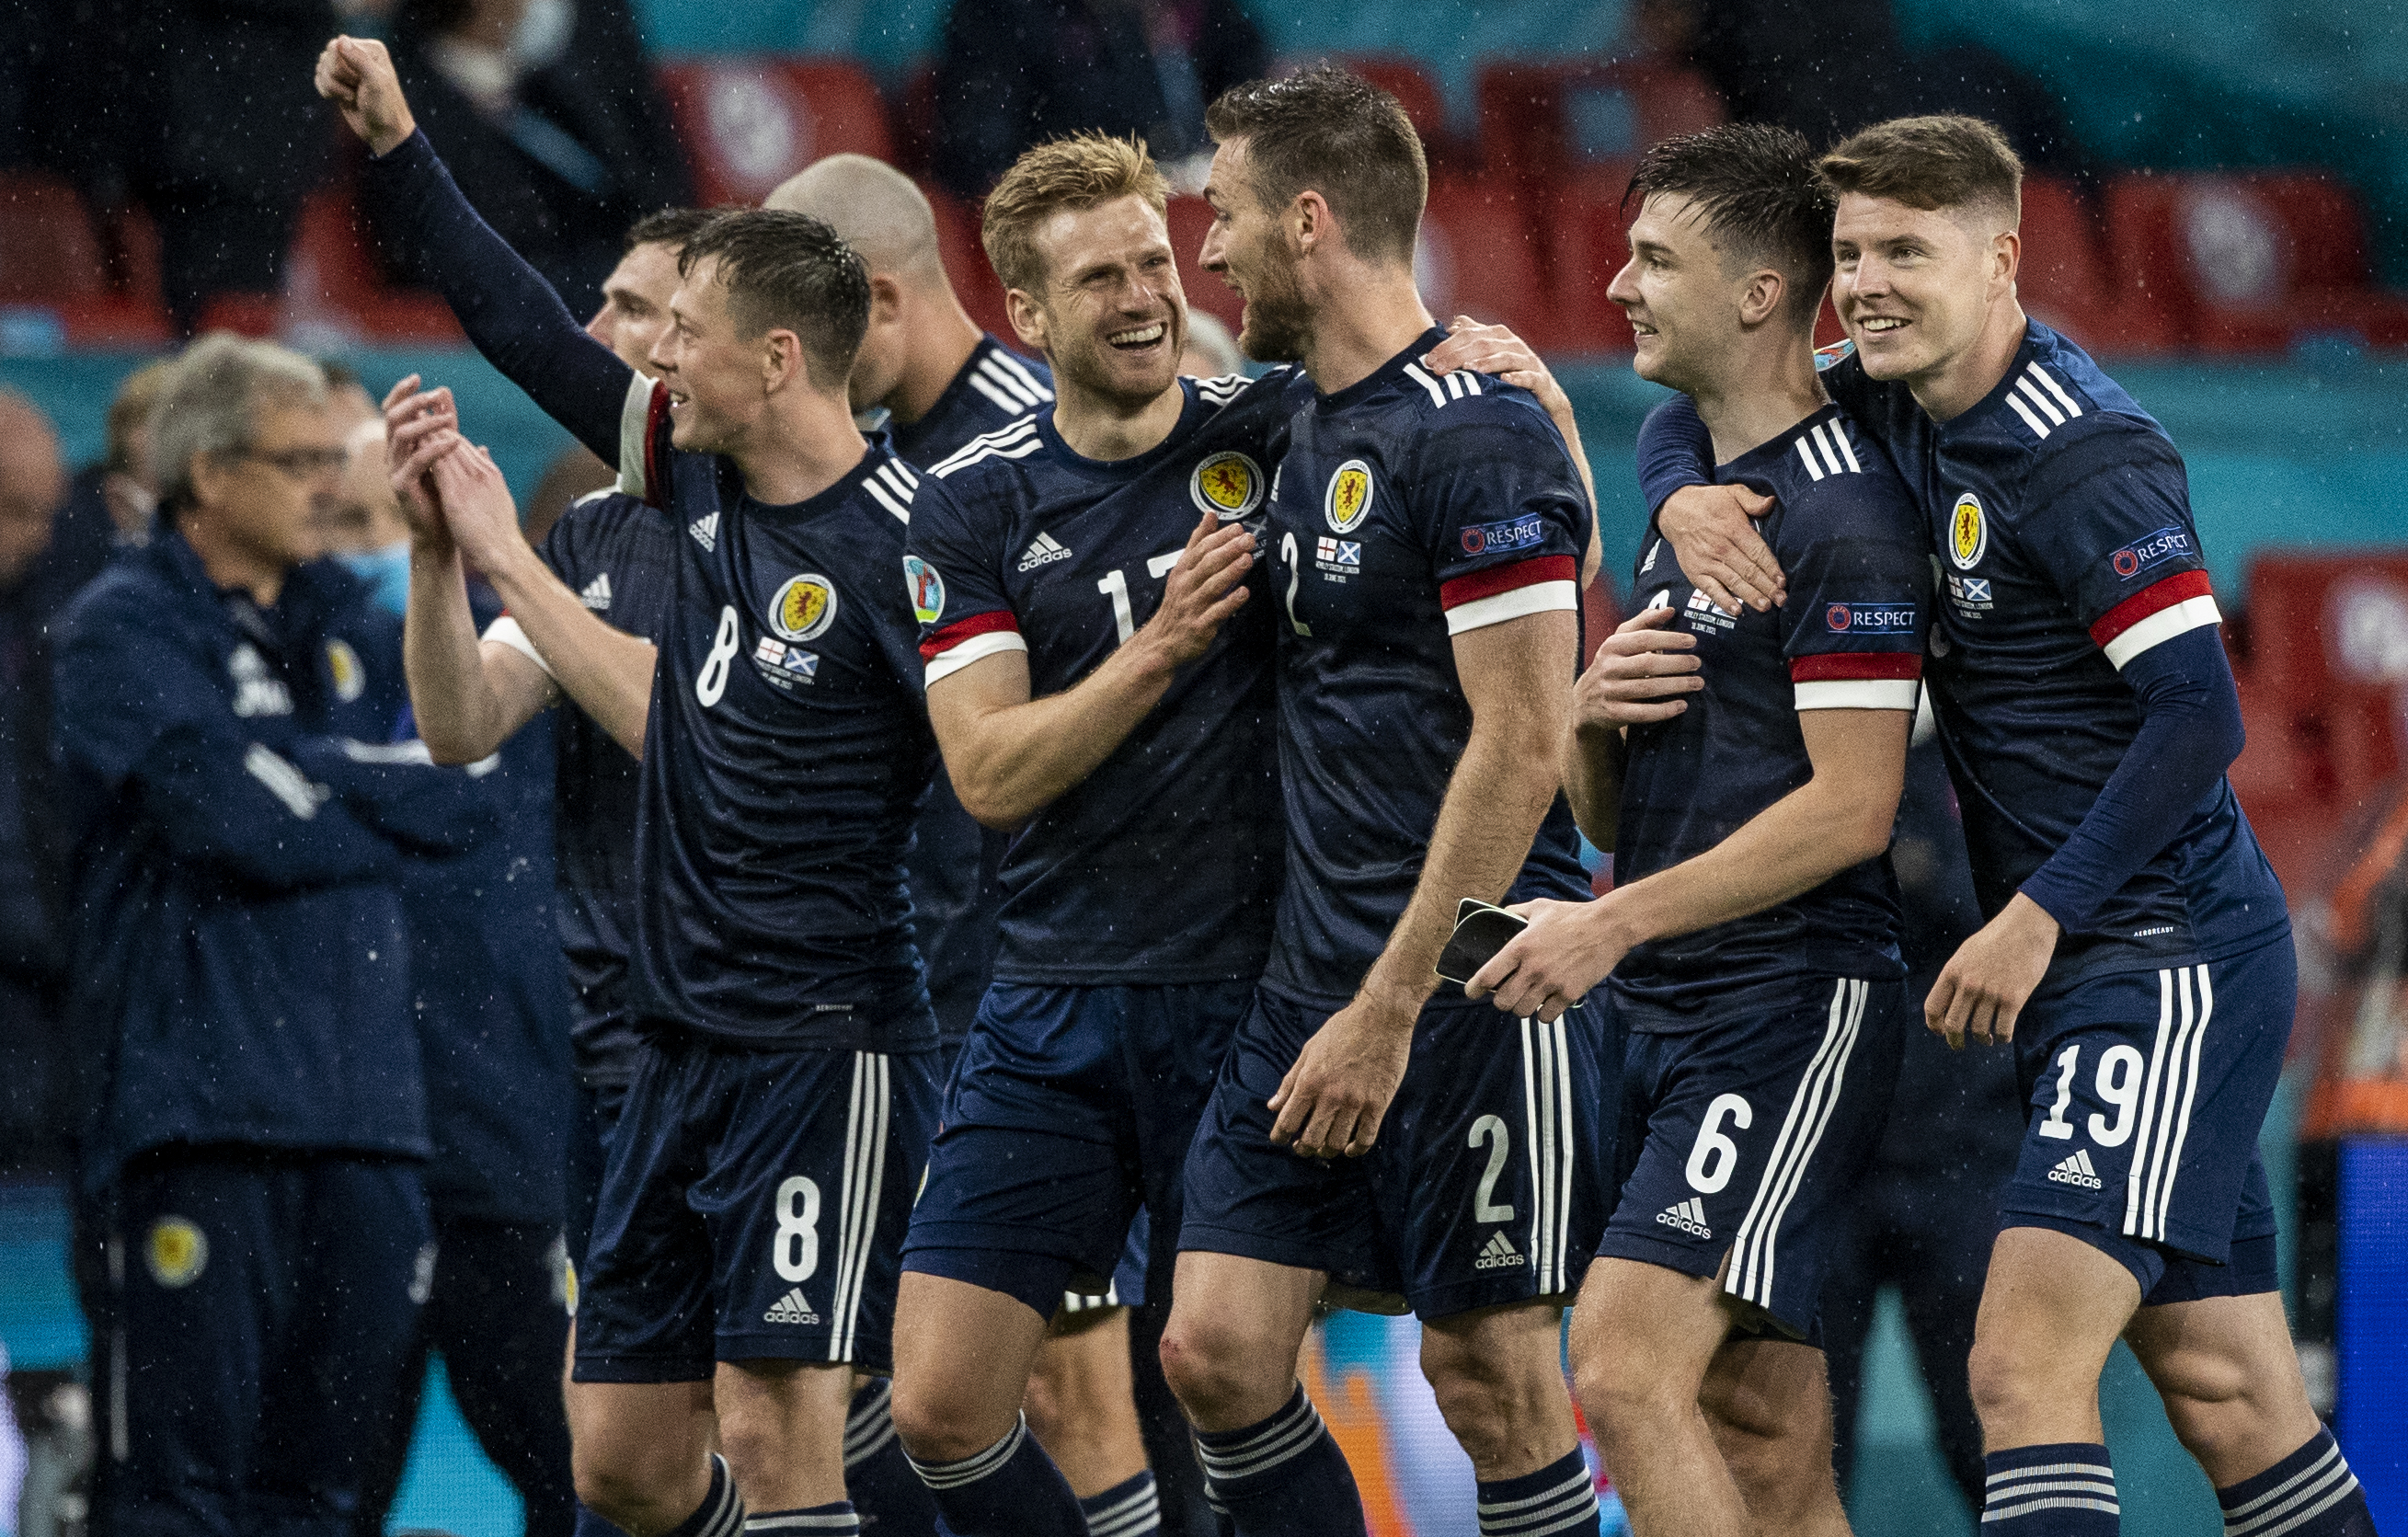 The highlight of Scotland's campaign was a 0-0 draw against England at Wembley.